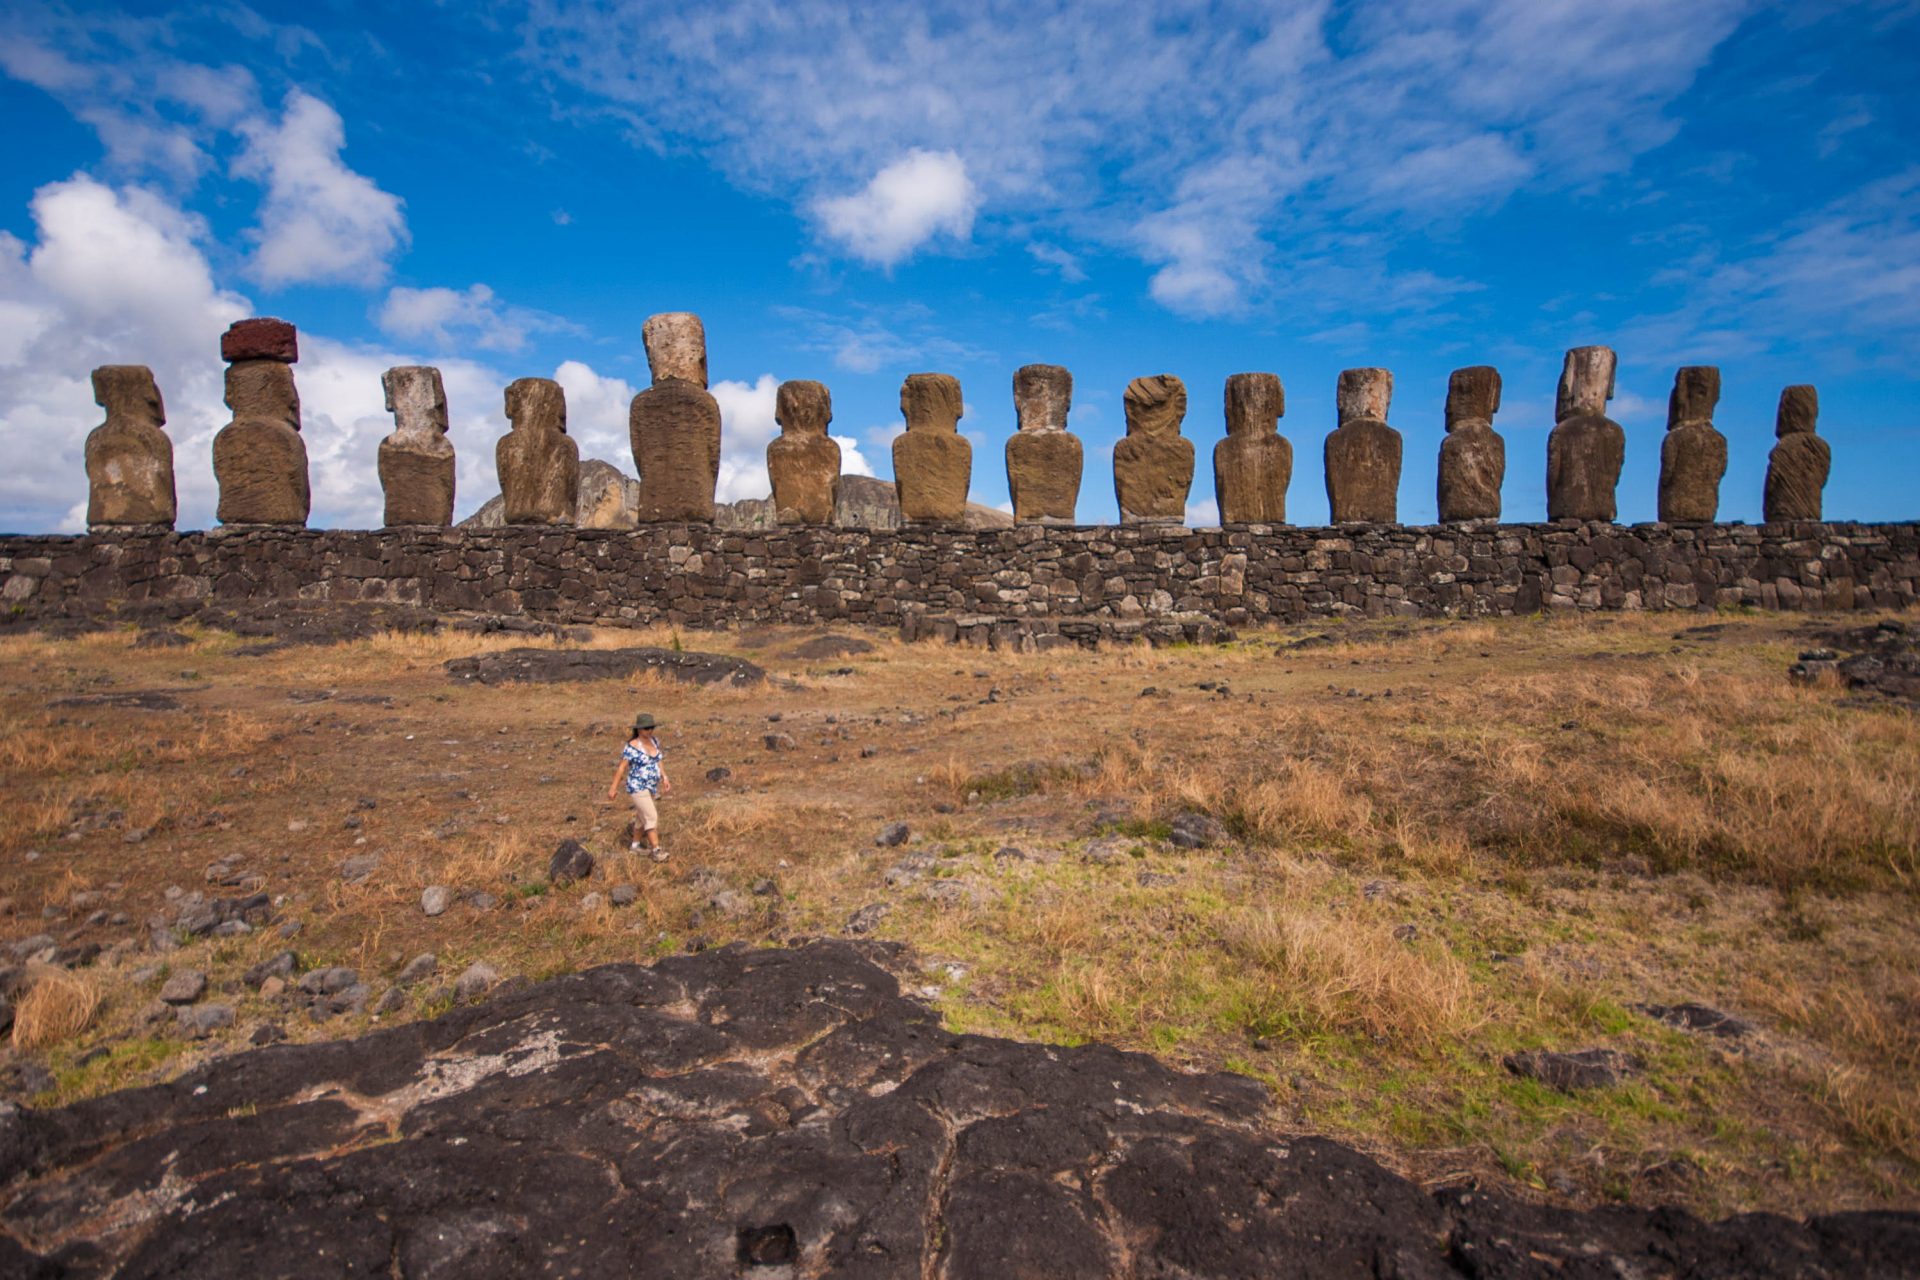 15 moai sit on an ahu looking inland towards Rano Raraku. In the foreground a pregnant woman walks towards the camera, dwarfed by the sculptures